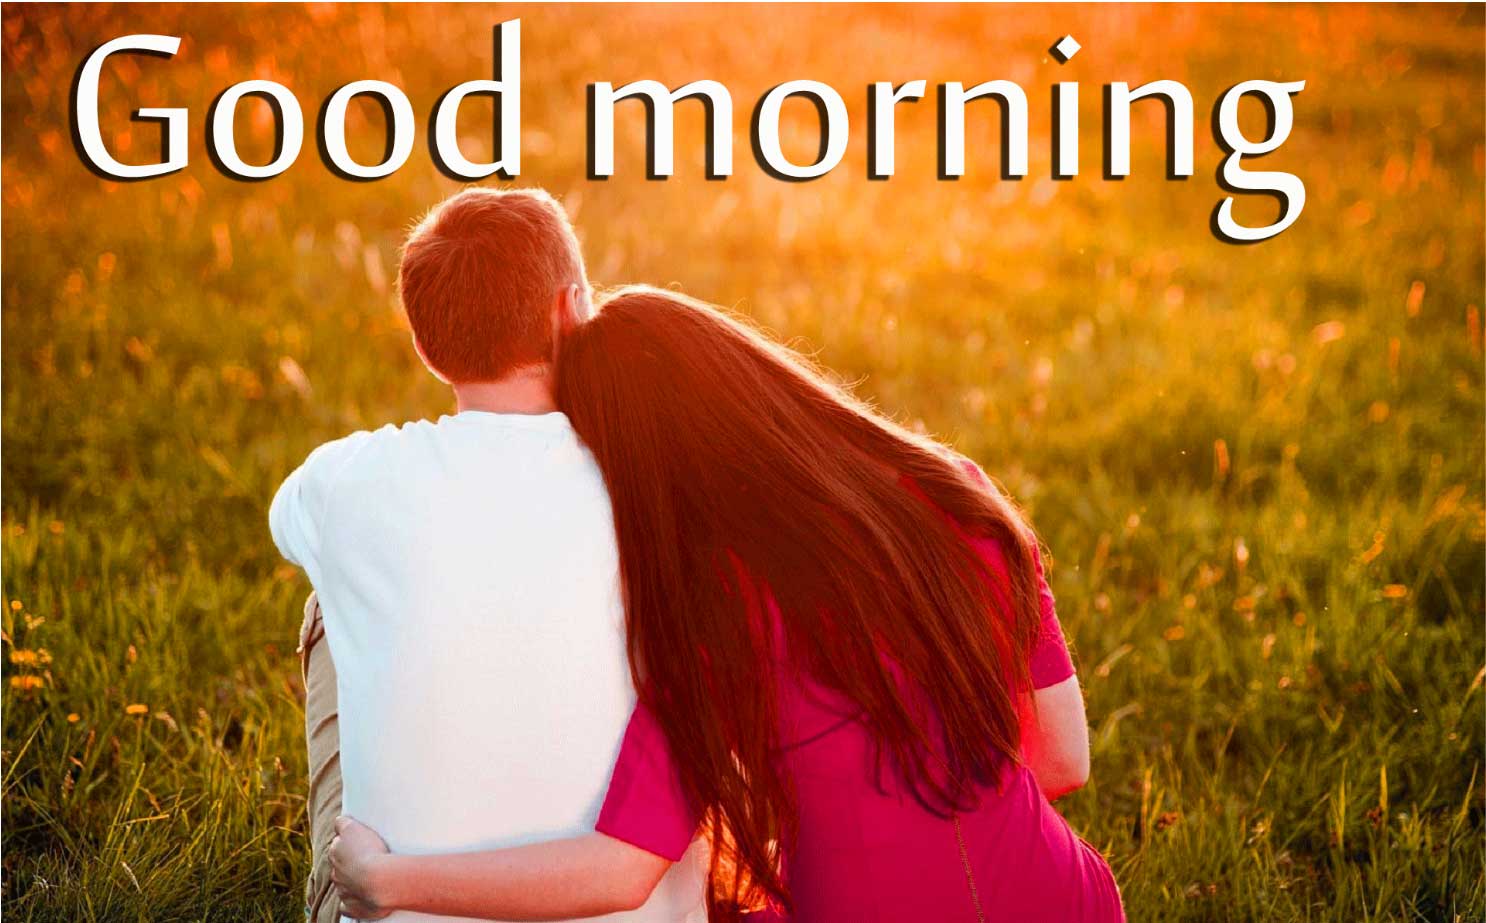 Romantic Good Morning Images For Love